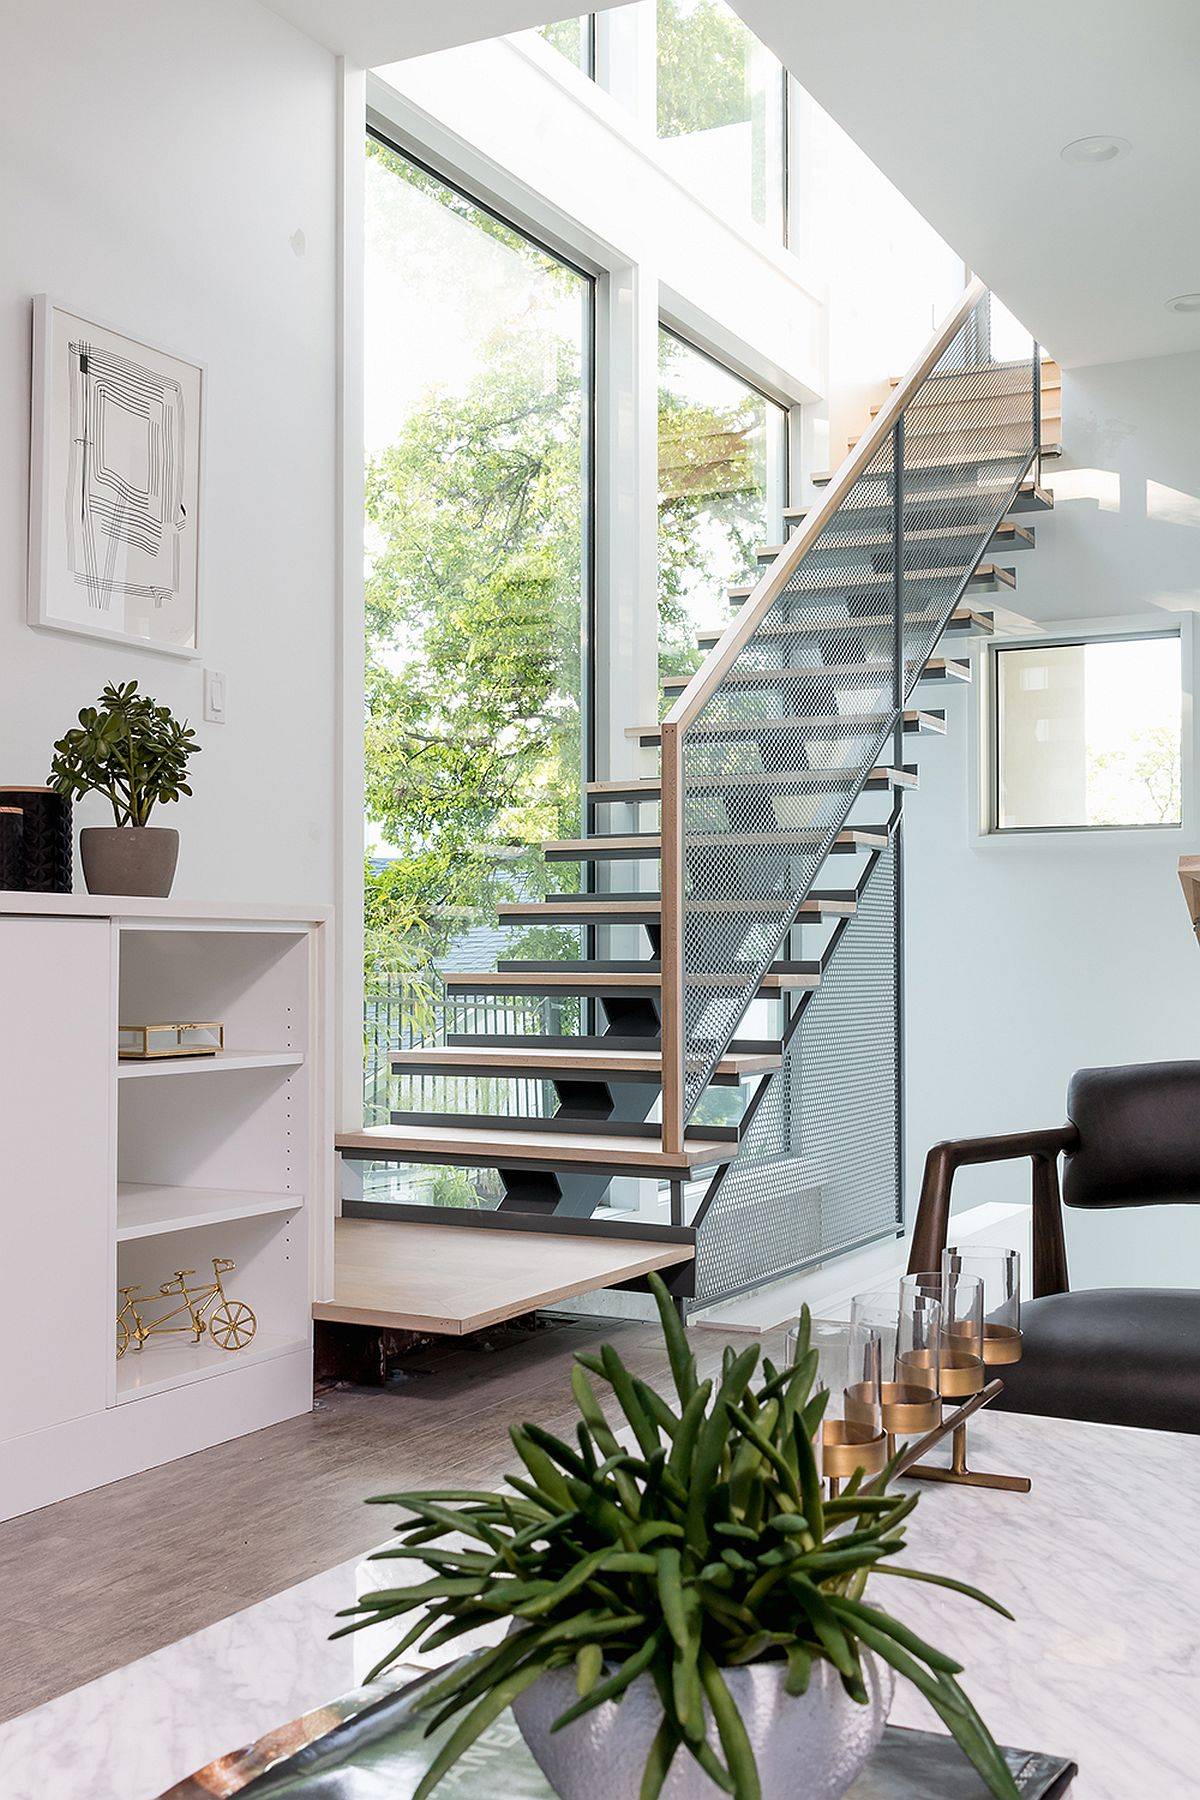 Slim-and-stylish-modern-stairway-with-wooden-treads-and-metallic-mesh-railing-40386